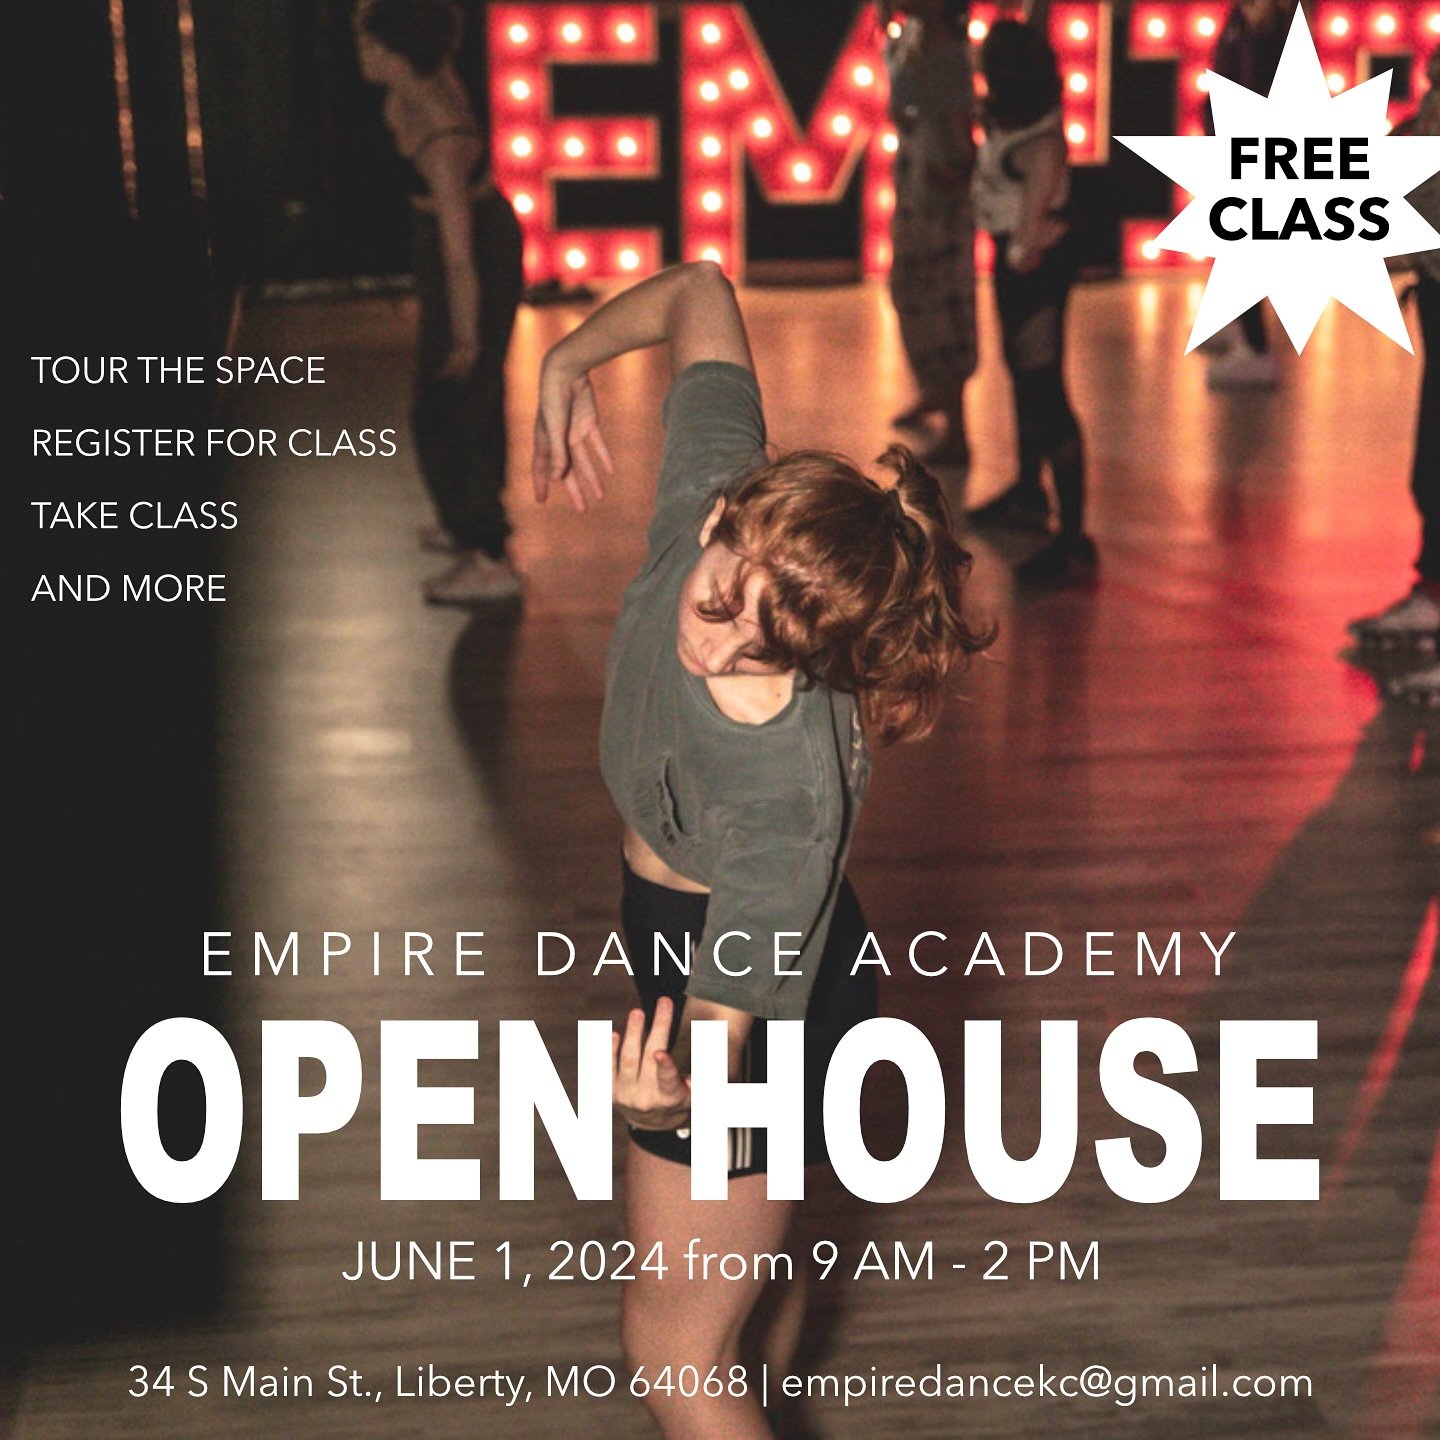 We&rsquo;re so excited to be in Liberty, MO and to show off our new facility and amazing faculty, we want to invite you to our FREE Open House June 1st, 2024 from 9 AM to 2 PM. 

Stop by any time throughout the day:
- Tour The Facility
- Take Class
-